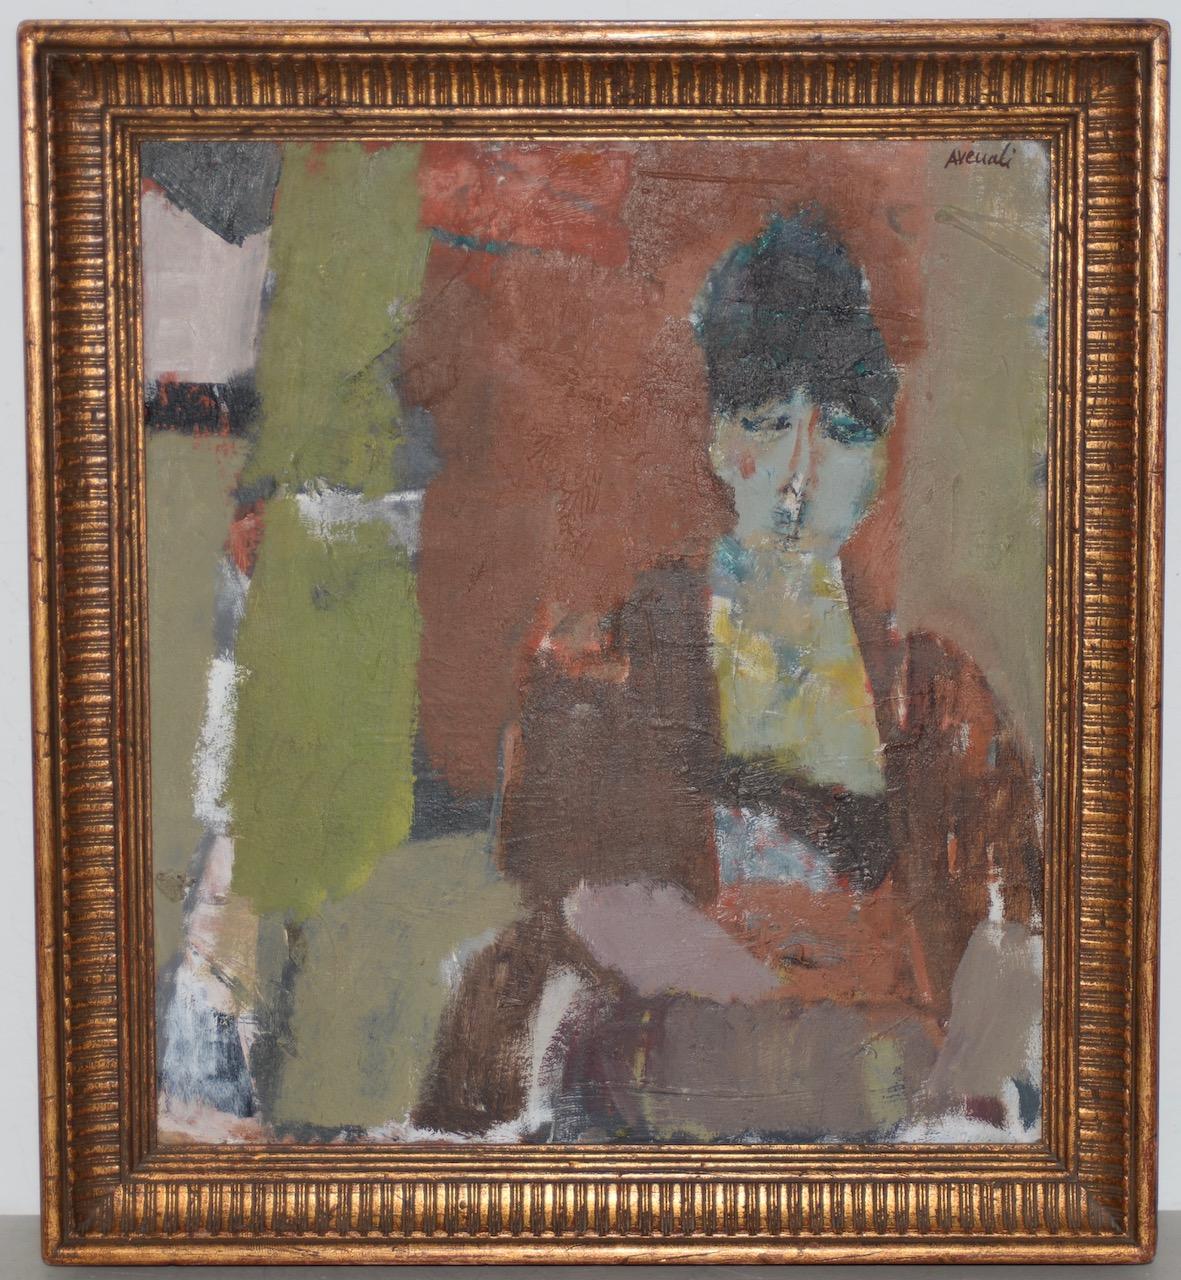 Marcello Avenali (Italy, 1912-1981) Oil Portrait of a Young Woman c.1950s

Fine abstract portrait of a young woman by listed artist Marcello Avenali.

Marcello Avenali was born in Rome, Italy in 1921 and died in Rom in 1981. He had a short life, but